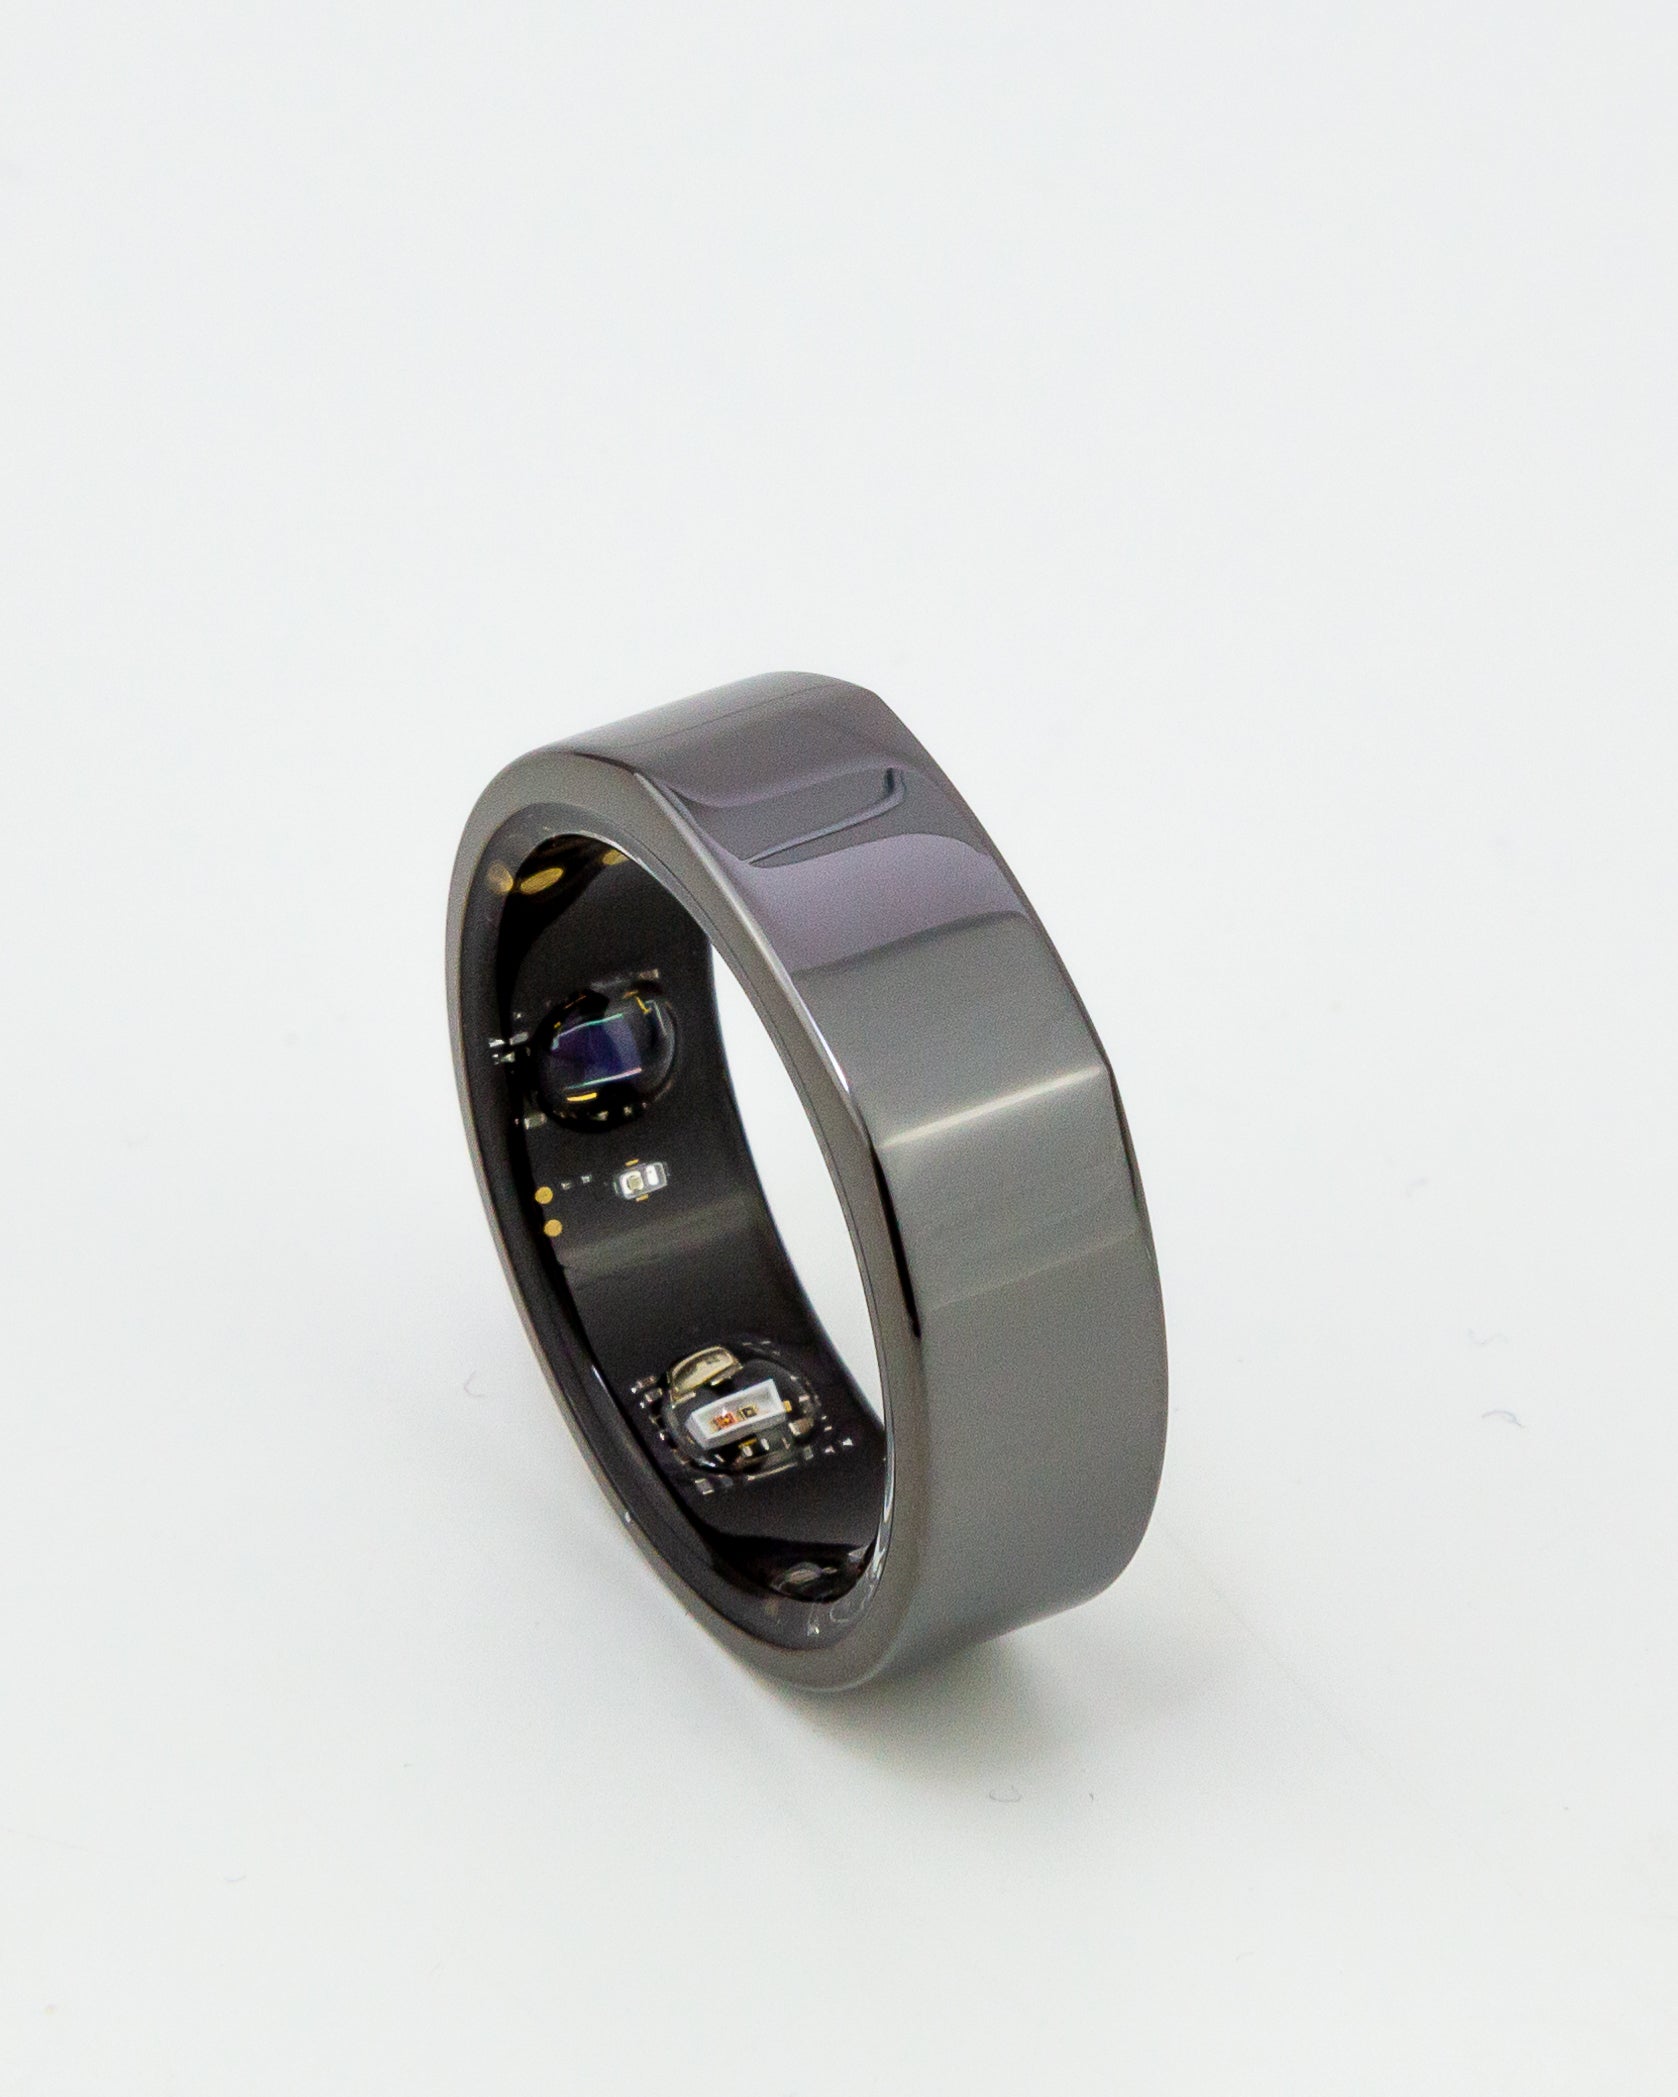 Oura Ring 3 Hands-On Review and Comparison (with WHOOP 4.0)